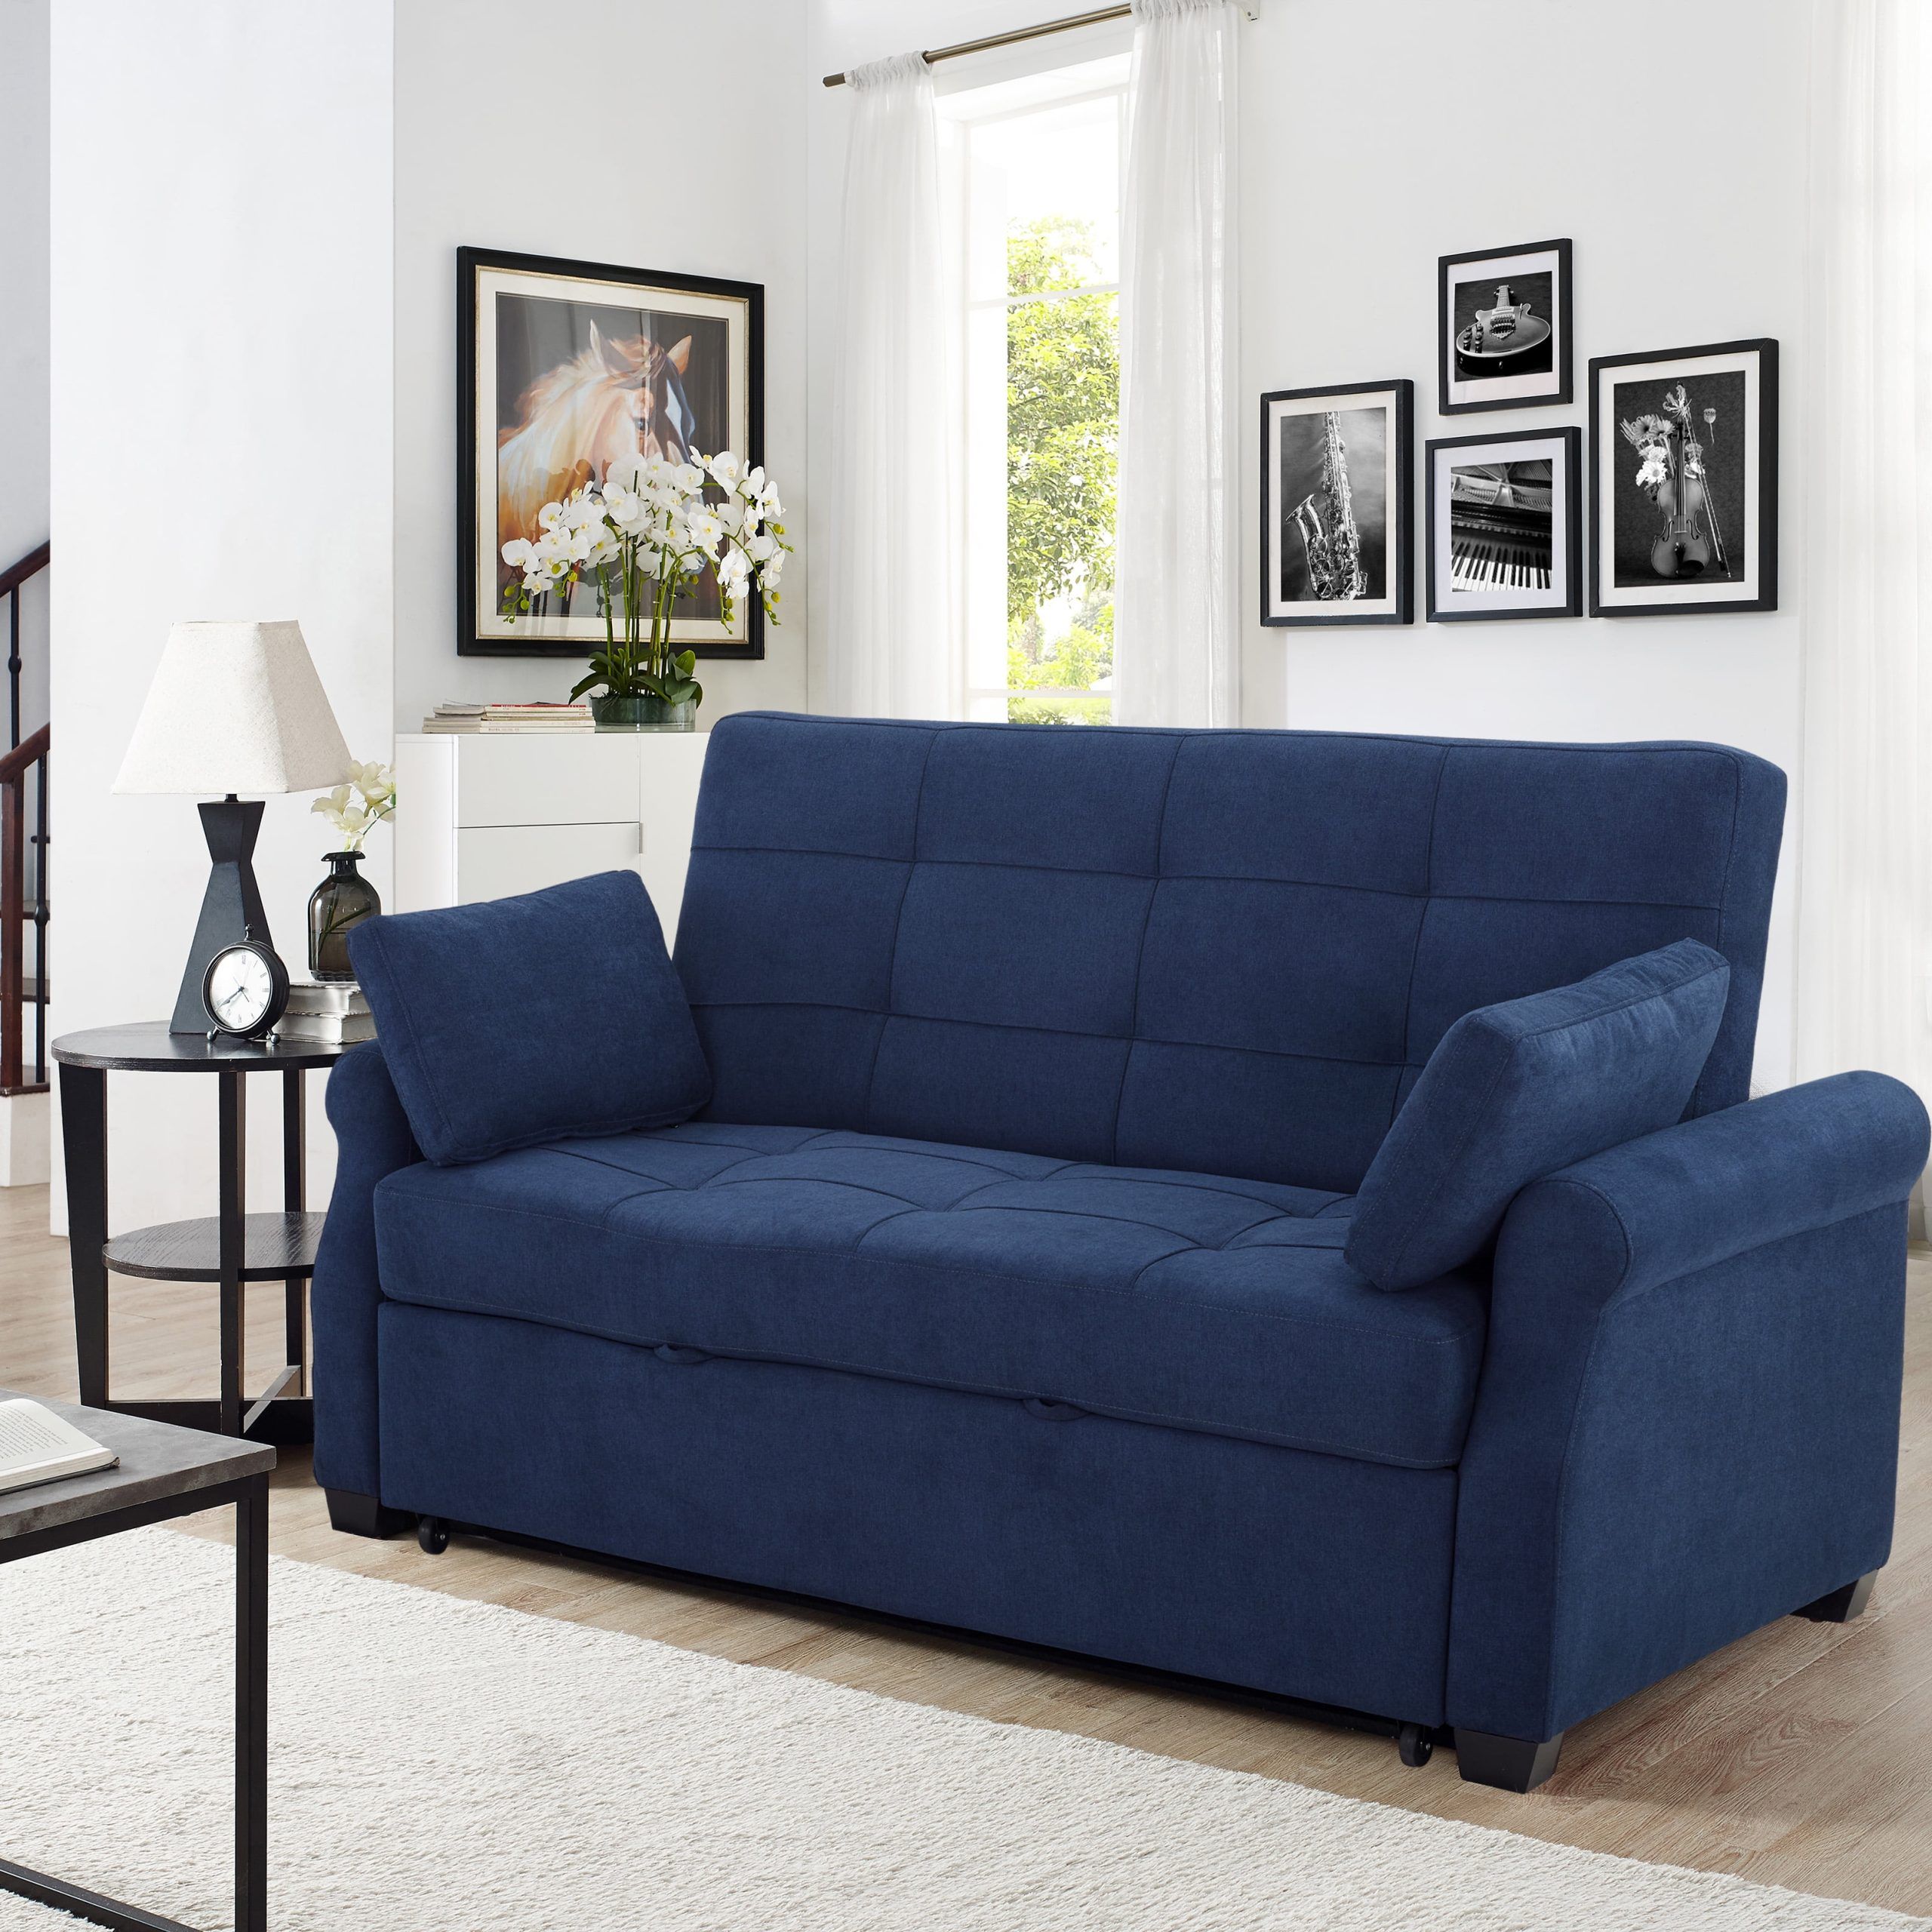 Serta Haiden Queen Sofa Bed, Navy Blue – Walmart – Walmart With Current Navy Sleeper Sofa Couches (View 7 of 15)